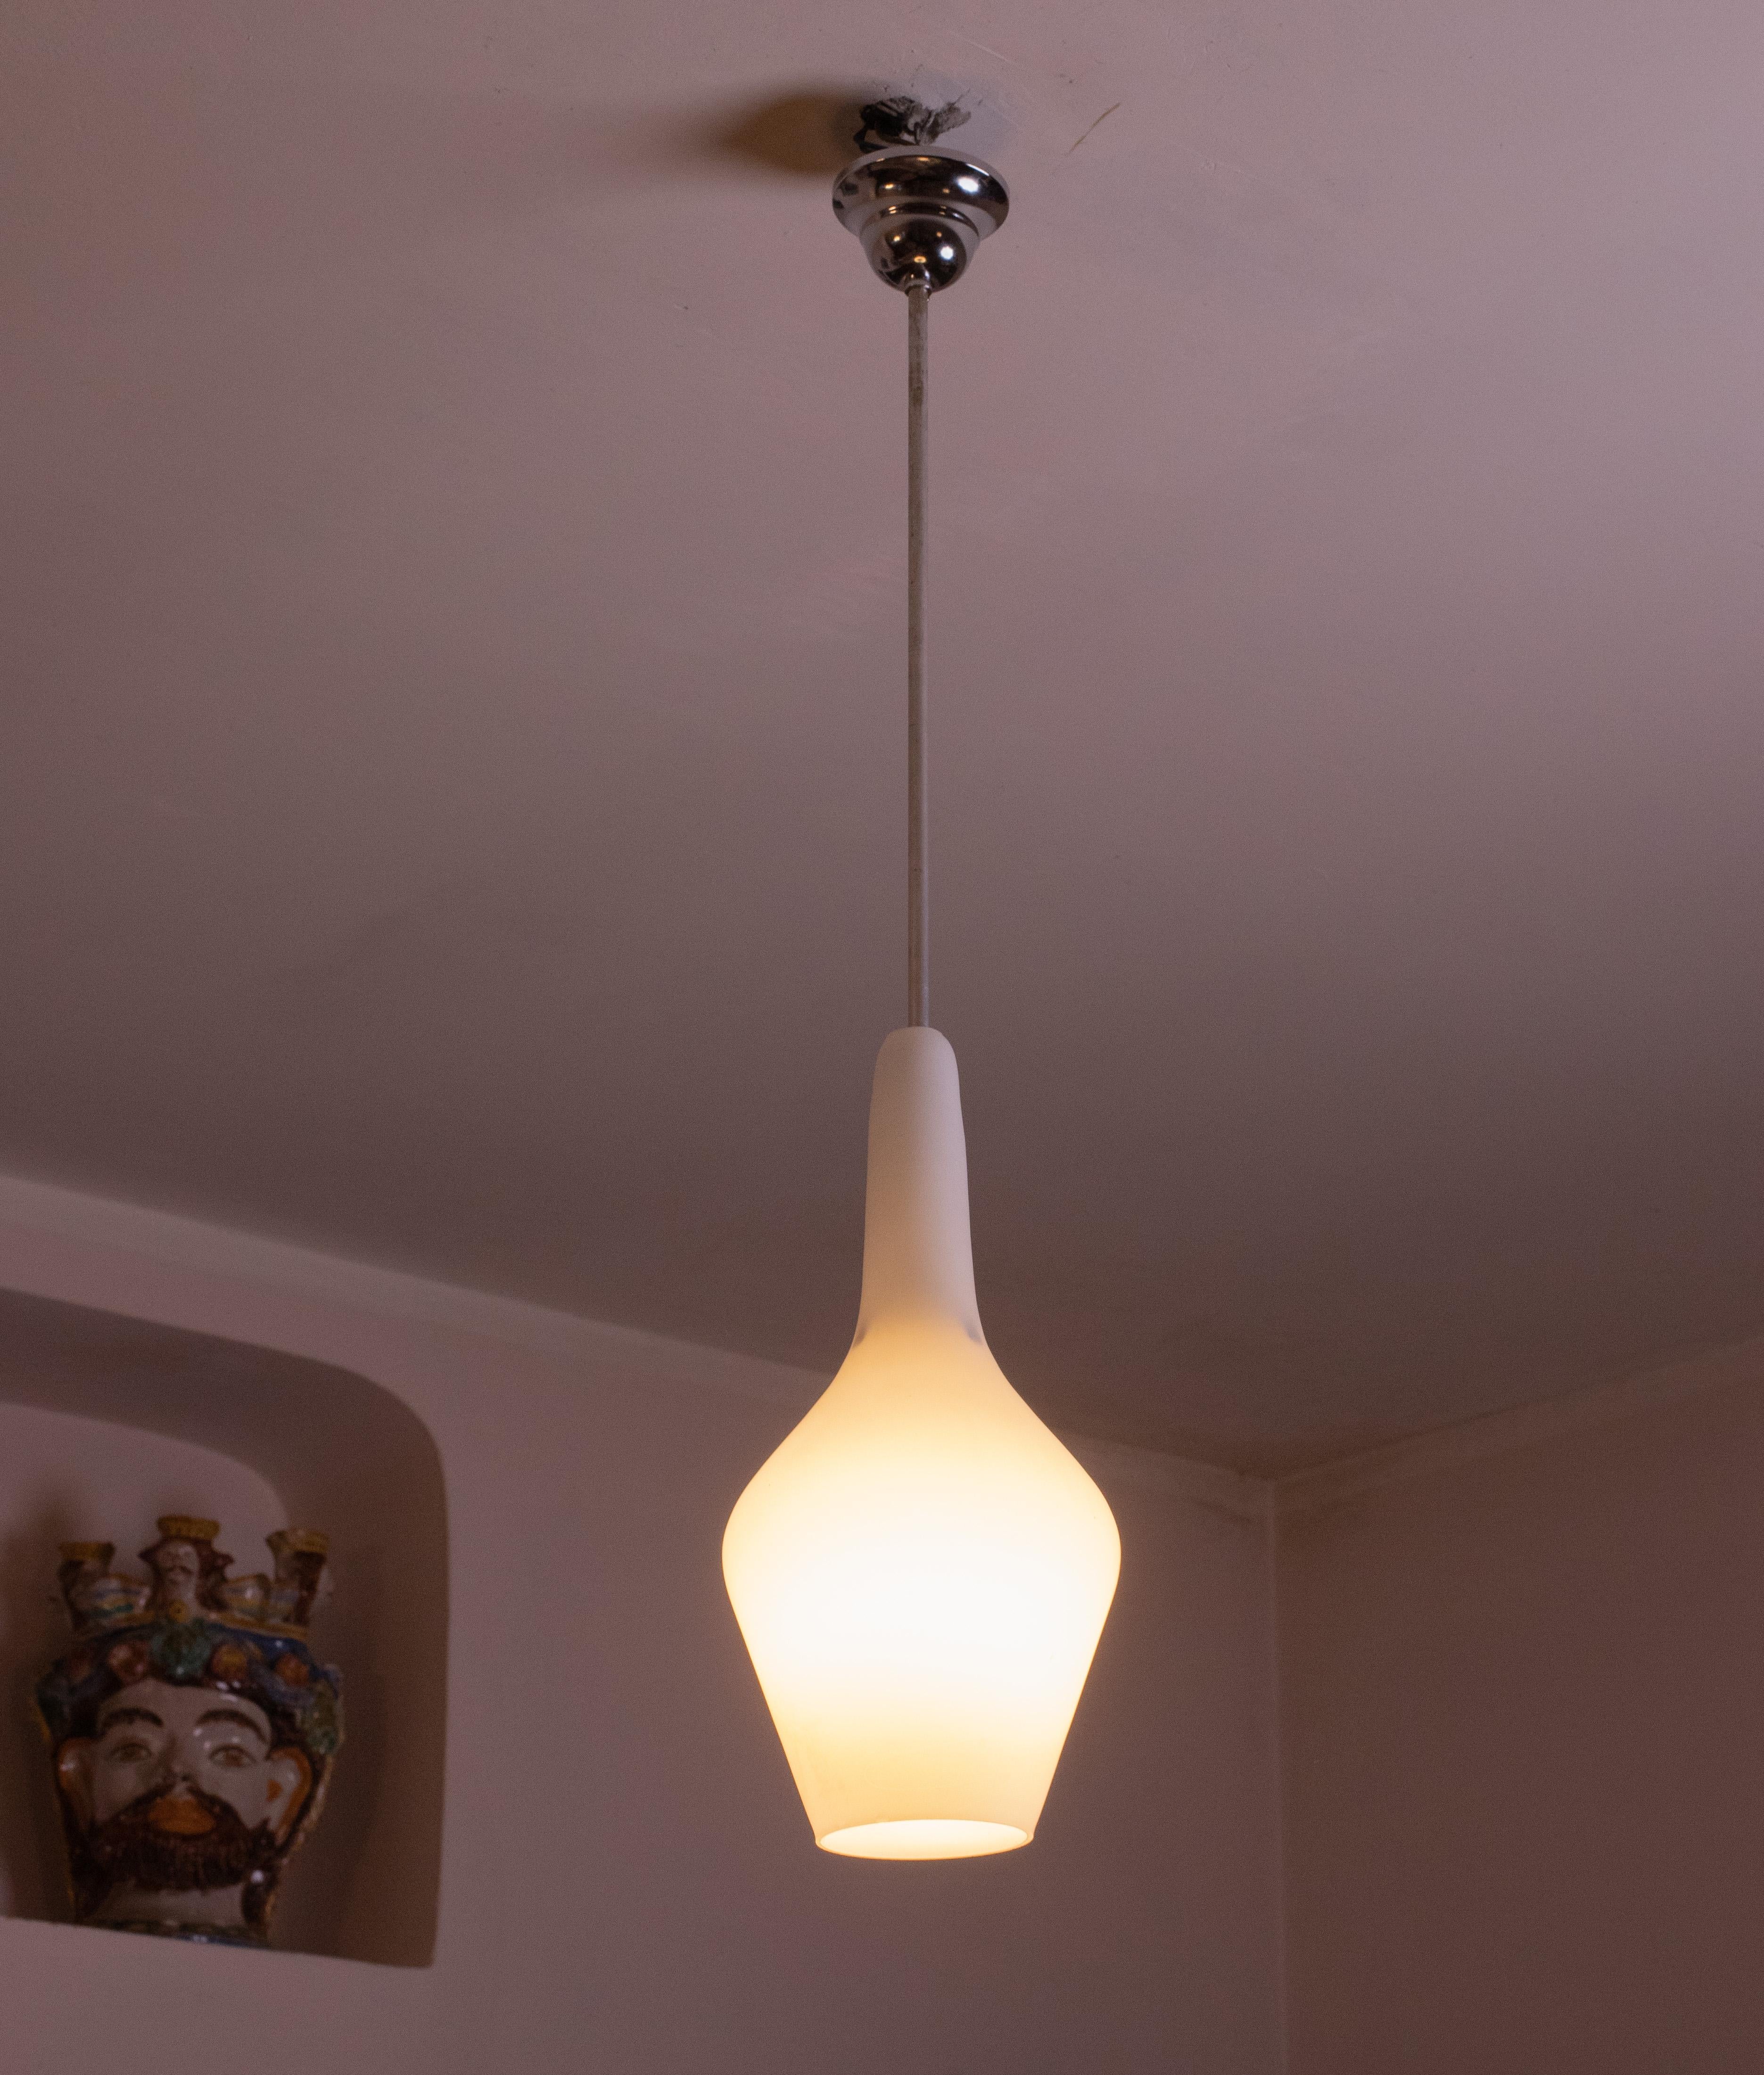 Stilnovo design opaline glass pendant made in the 1970s.
It connects to the ceiling with a brass element; the wire cover rosette has been replaced.
The cap is made of white opaline glass, attached to the structure by an aluminum element. The